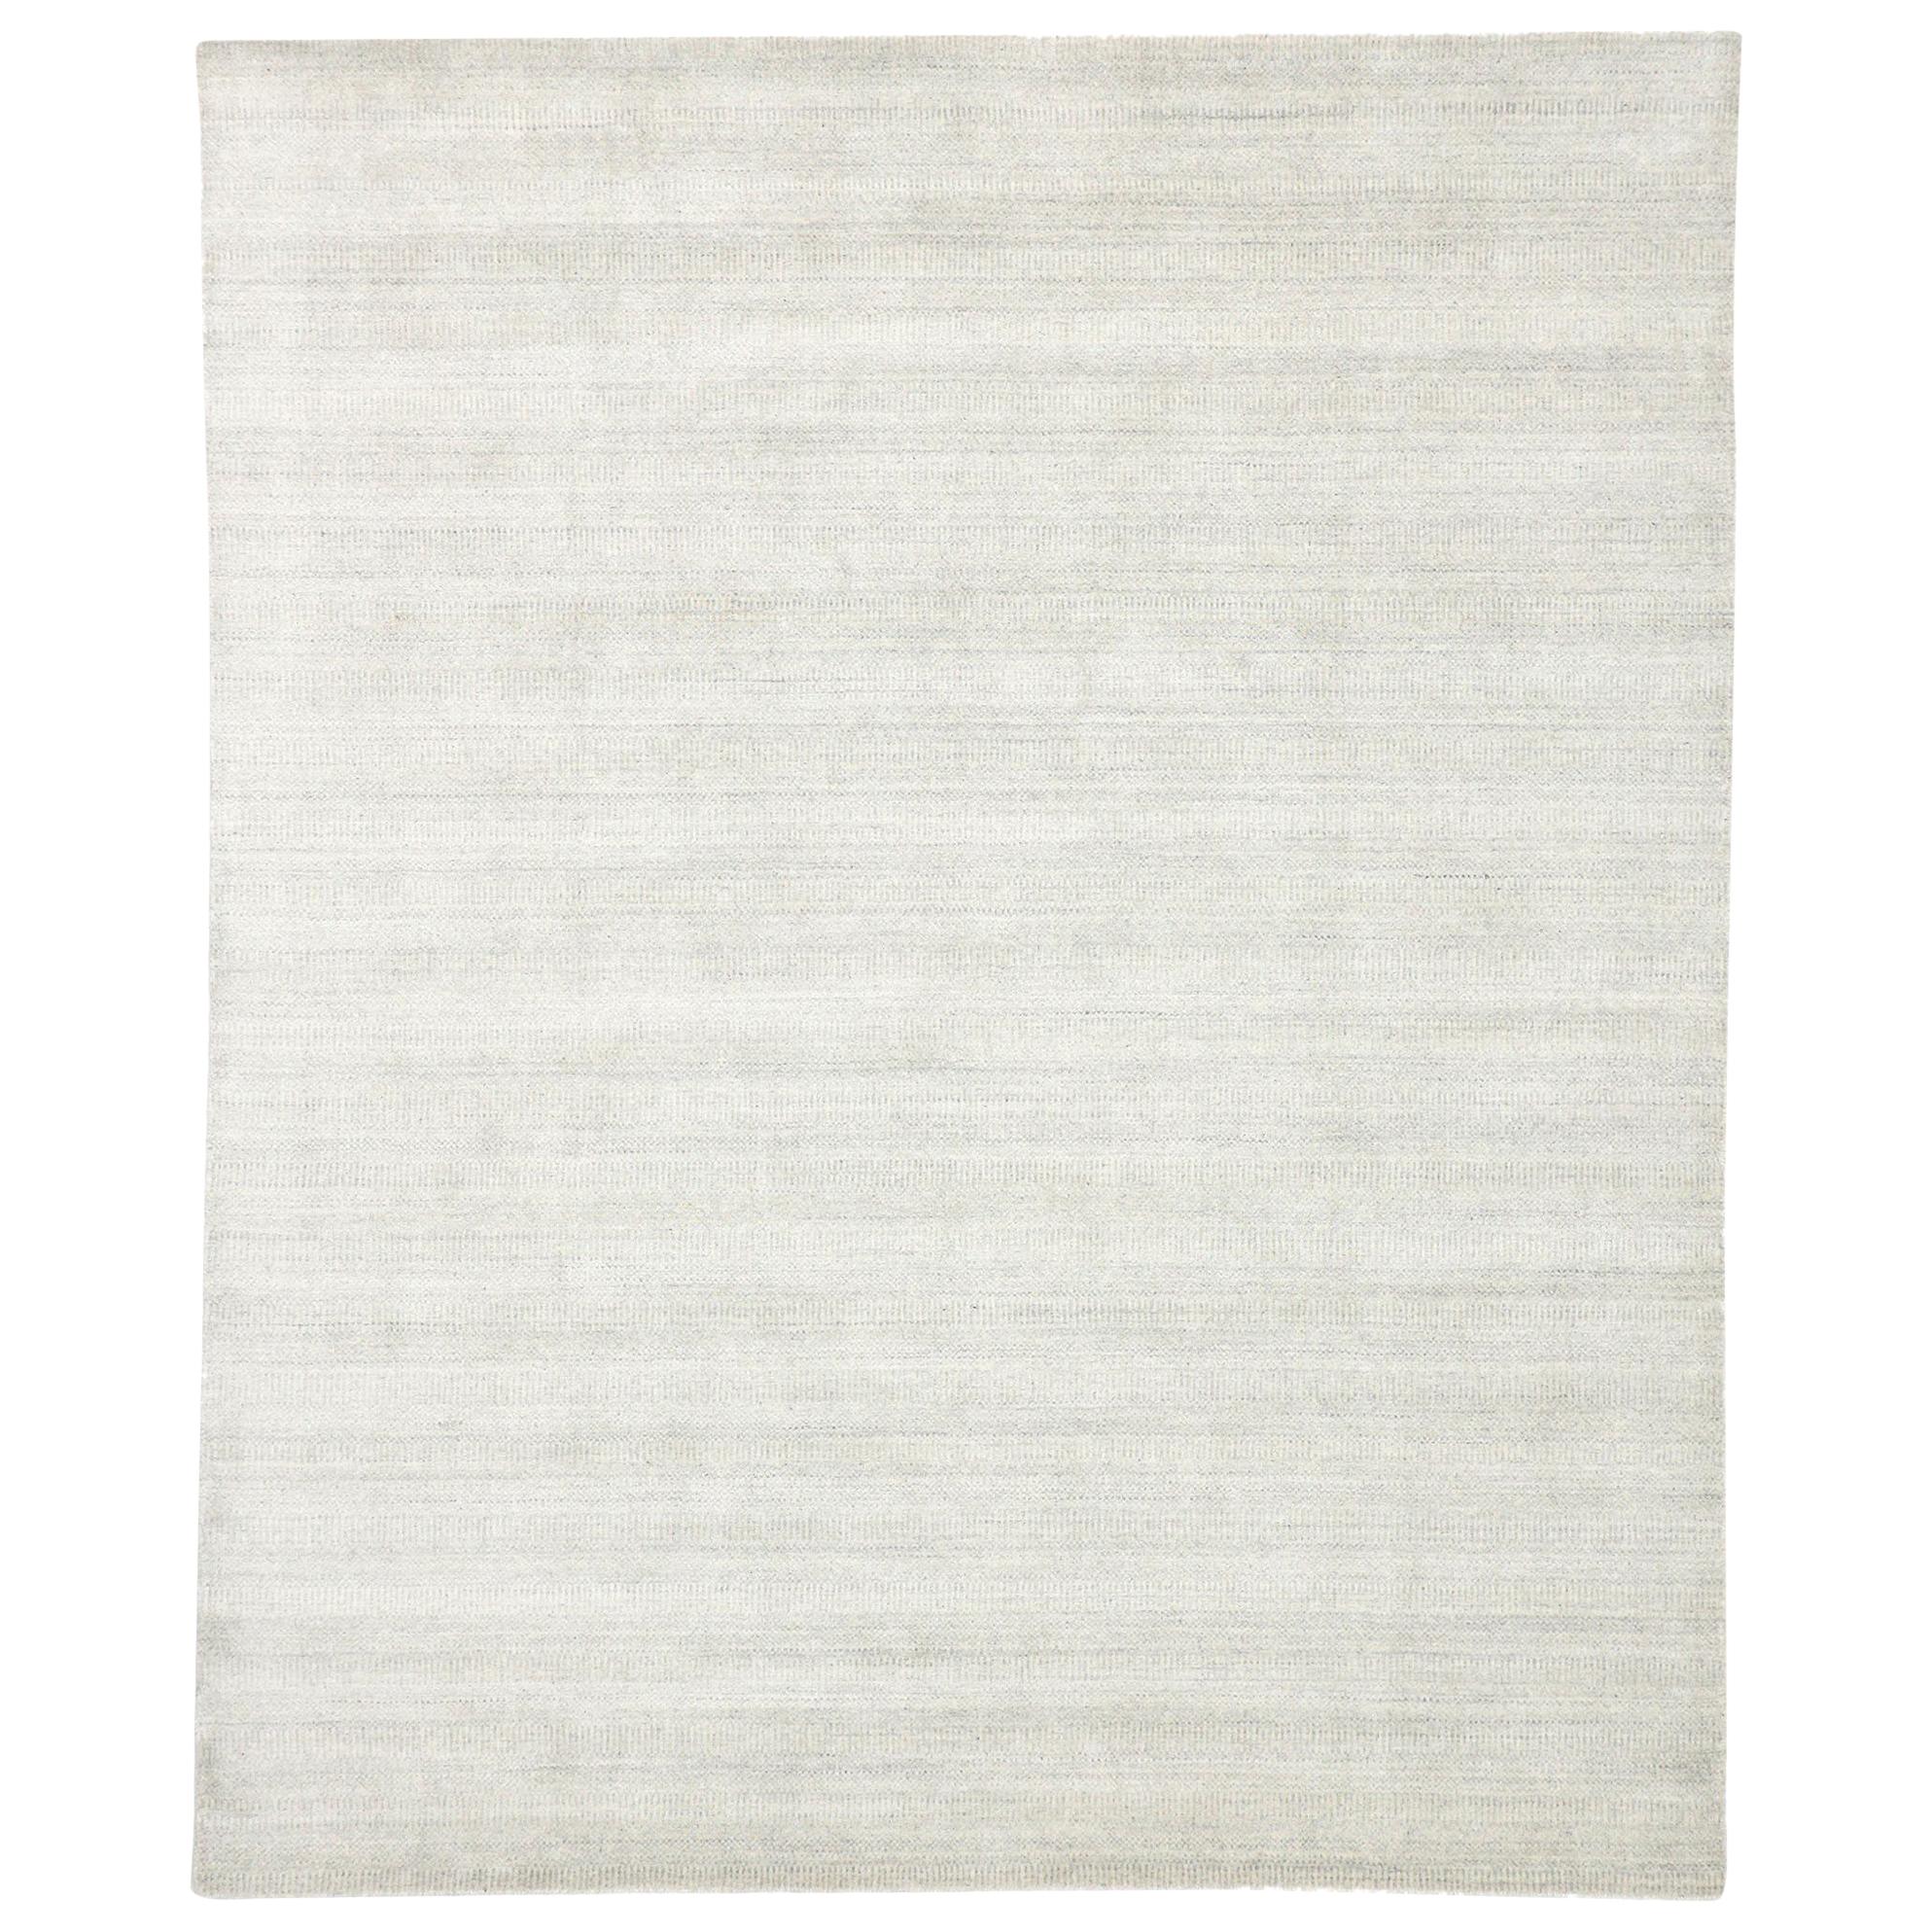 New Transitional Light Gray Area Rug with Scandinavian Modern Nordic Style